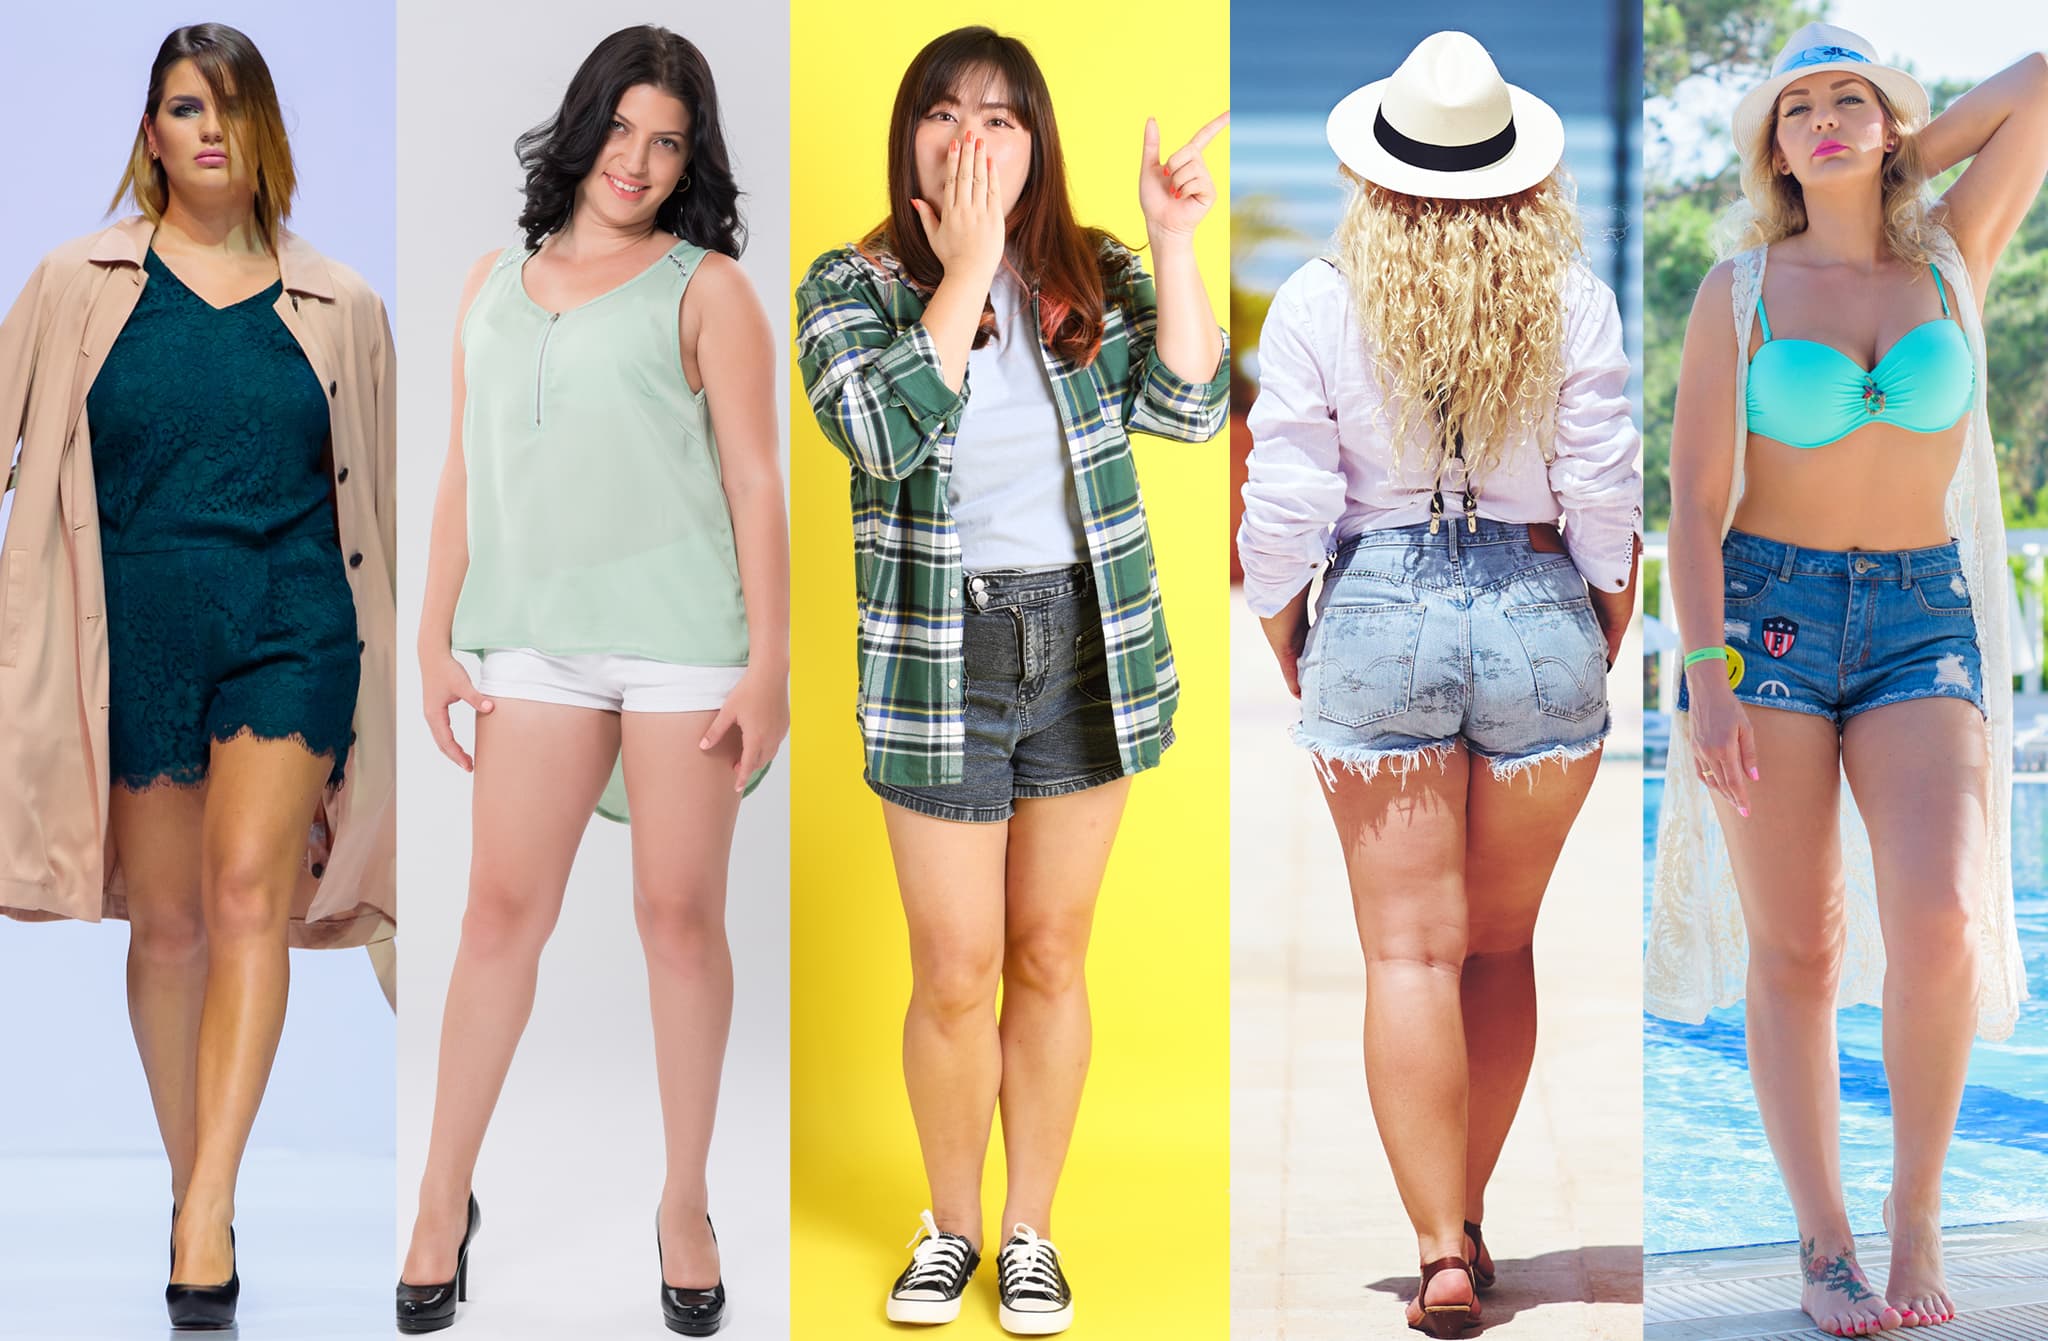 There are plenty of short silhouette options that can look flattering for plus-size women